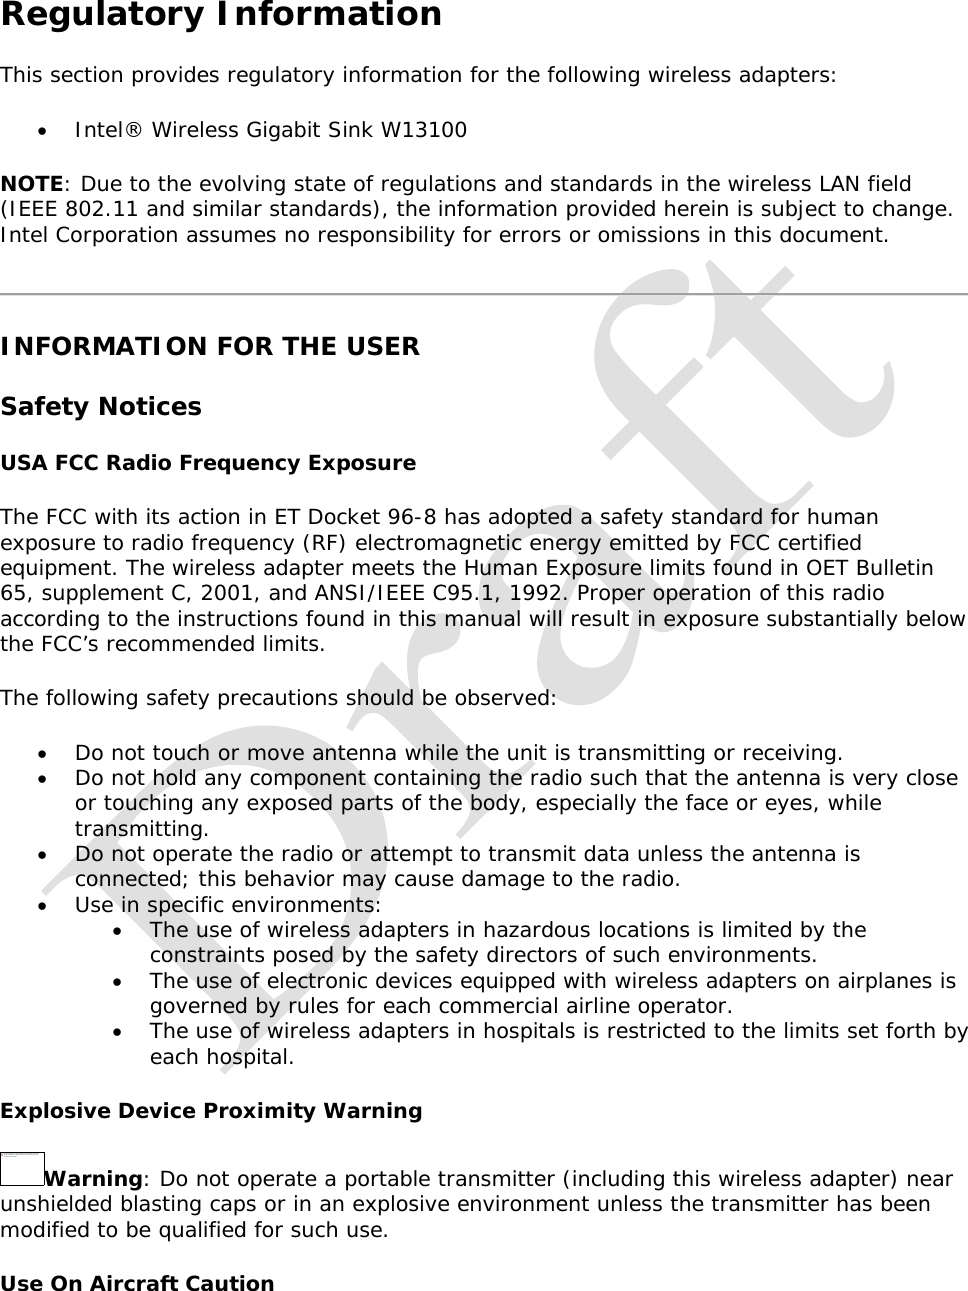   Regulatory Information This section provides regulatory information for the following wireless adapters:  Intel® Wireless Gigabit Sink W13100 NOTE: Due to the evolving state of regulations and standards in the wireless LAN field (IEEE 802.11 and similar standards), the information provided herein is subject to change. Intel Corporation assumes no responsibility for errors or omissions in this document.  INFORMATION FOR THE USER Safety Notices USA FCC Radio Frequency Exposure The FCC with its action in ET Docket 96-8 has adopted a safety standard for human exposure to radio frequency (RF) electromagnetic energy emitted by FCC certified equipment. The wireless adapter meets the Human Exposure limits found in OET Bulletin 65, supplement C, 2001, and ANSI/IEEE C95.1, 1992. Proper operation of this radio according to the instructions found in this manual will result in exposure substantially below the FCC’s recommended limits. The following safety precautions should be observed:  Do not touch or move antenna while the unit is transmitting or receiving.  Do not hold any component containing the radio such that the antenna is very close or touching any exposed parts of the body, especially the face or eyes, while transmitting.  Do not operate the radio or attempt to transmit data unless the antenna is connected; this behavior may cause damage to the radio.  Use in specific environments:   The use of wireless adapters in hazardous locations is limited by the constraints posed by the safety directors of such environments.  The use of electronic devices equipped with wireless adapters on airplanes is governed by rules for each commercial airline operator.  The use of wireless adapters in hospitals is restricted to the limits set forth by each hospital. Explosive Device Proximity Warning Warning: Do not operate a portable transmitter (including this wireless adapter) near unshielded blasting caps or in an explosive environment unless the transmitter has been modified to be qualified for such use. Use On Aircraft Caution The linked imag e canno t be display ed.  The file may  have b een  moved, r enamed, o r deleted.  Verify th at the link  poin ts to the  correct file an d locatio n.